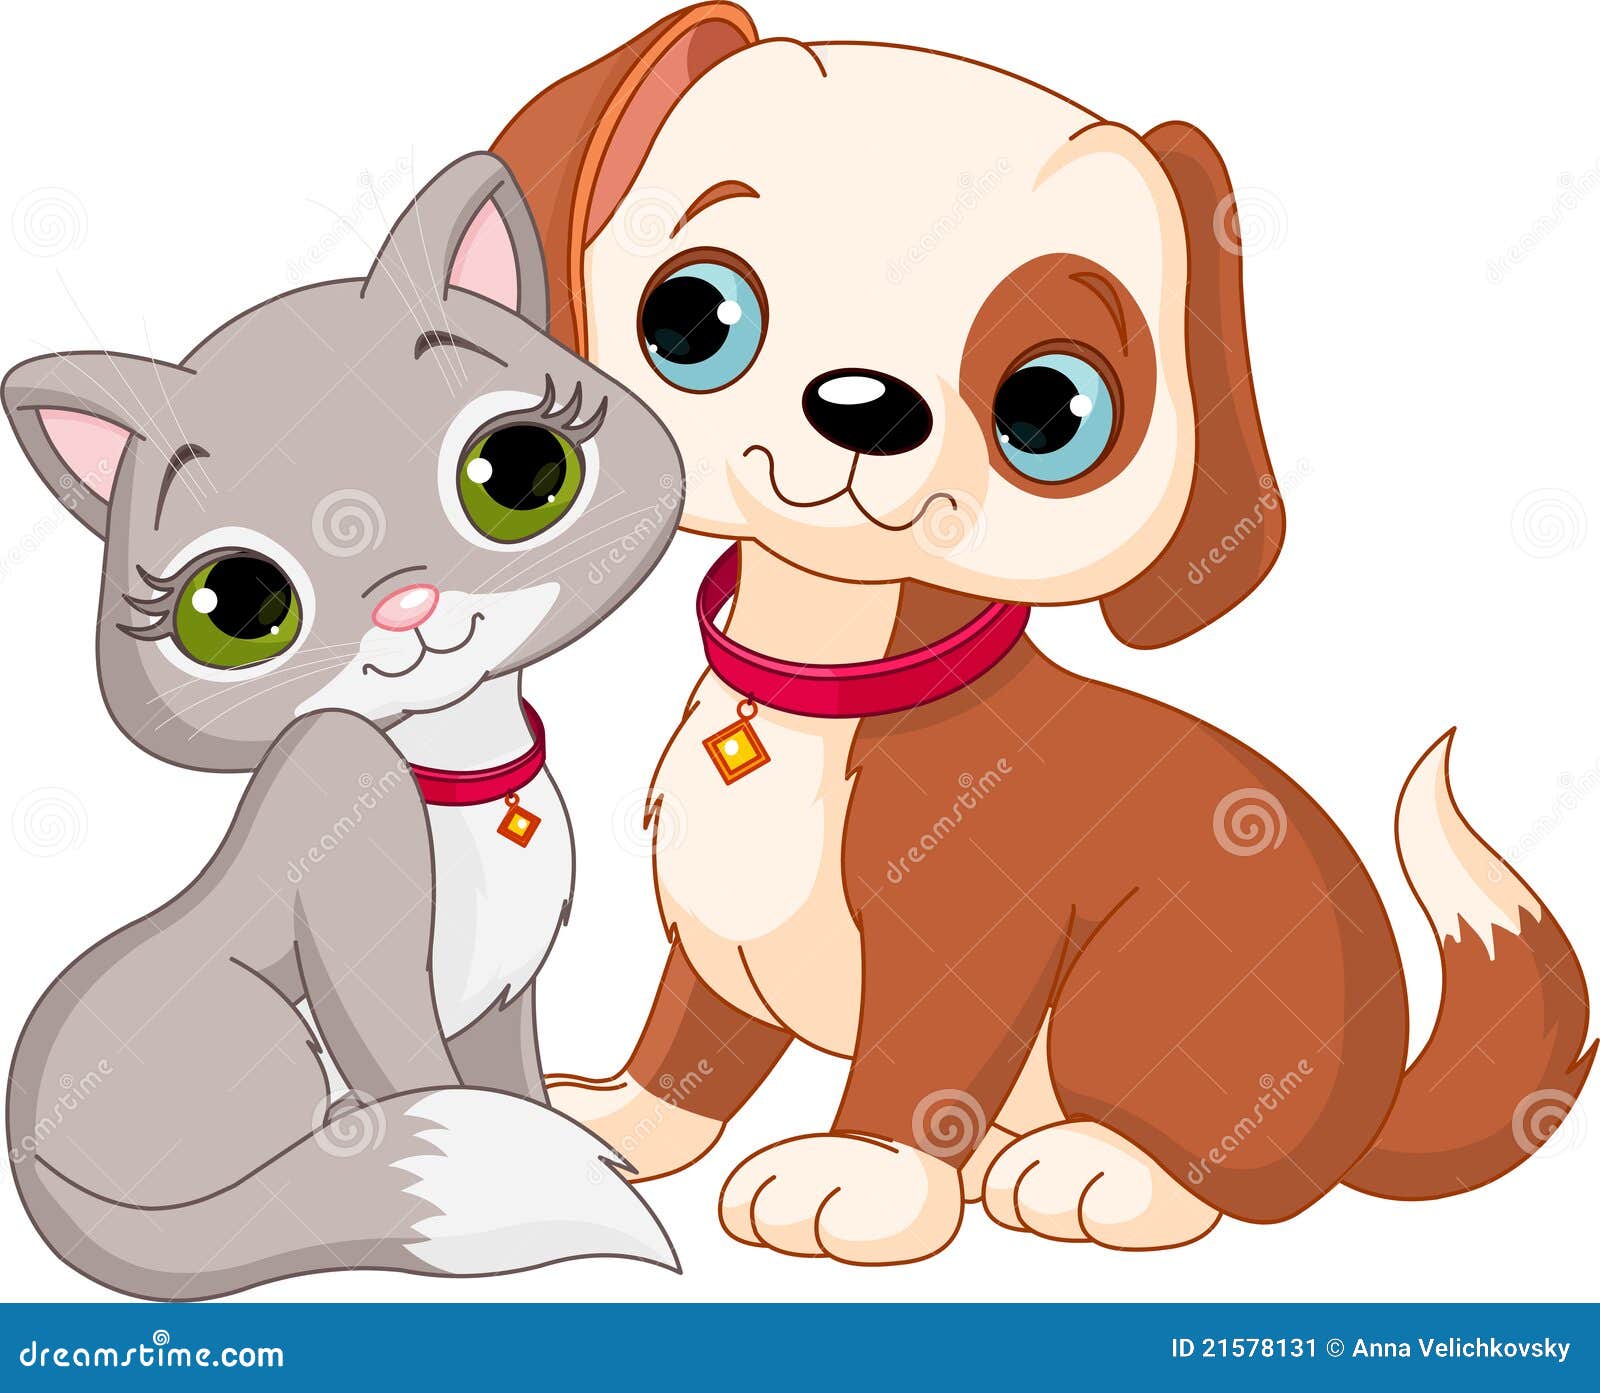 Cat and dog stock vector. Illustration of humorous, doggy